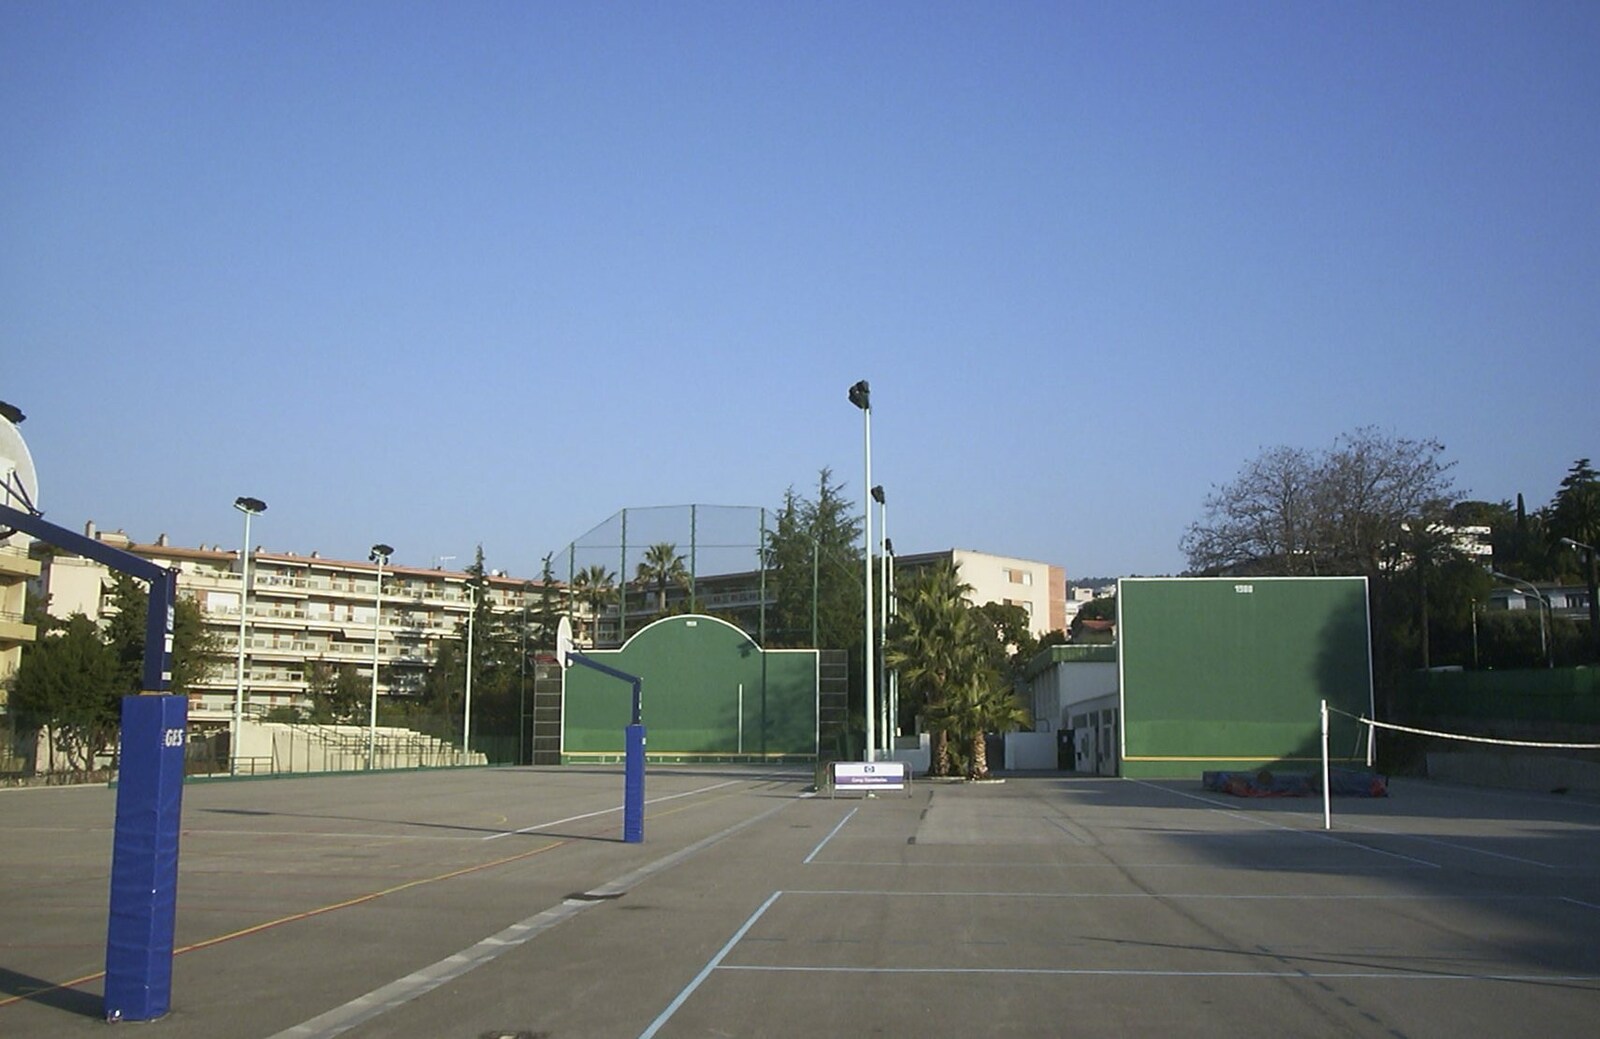 Back on the baseball courts from 3G Lab at the 3GSM Conference, Cannes, France - 17th February 2003